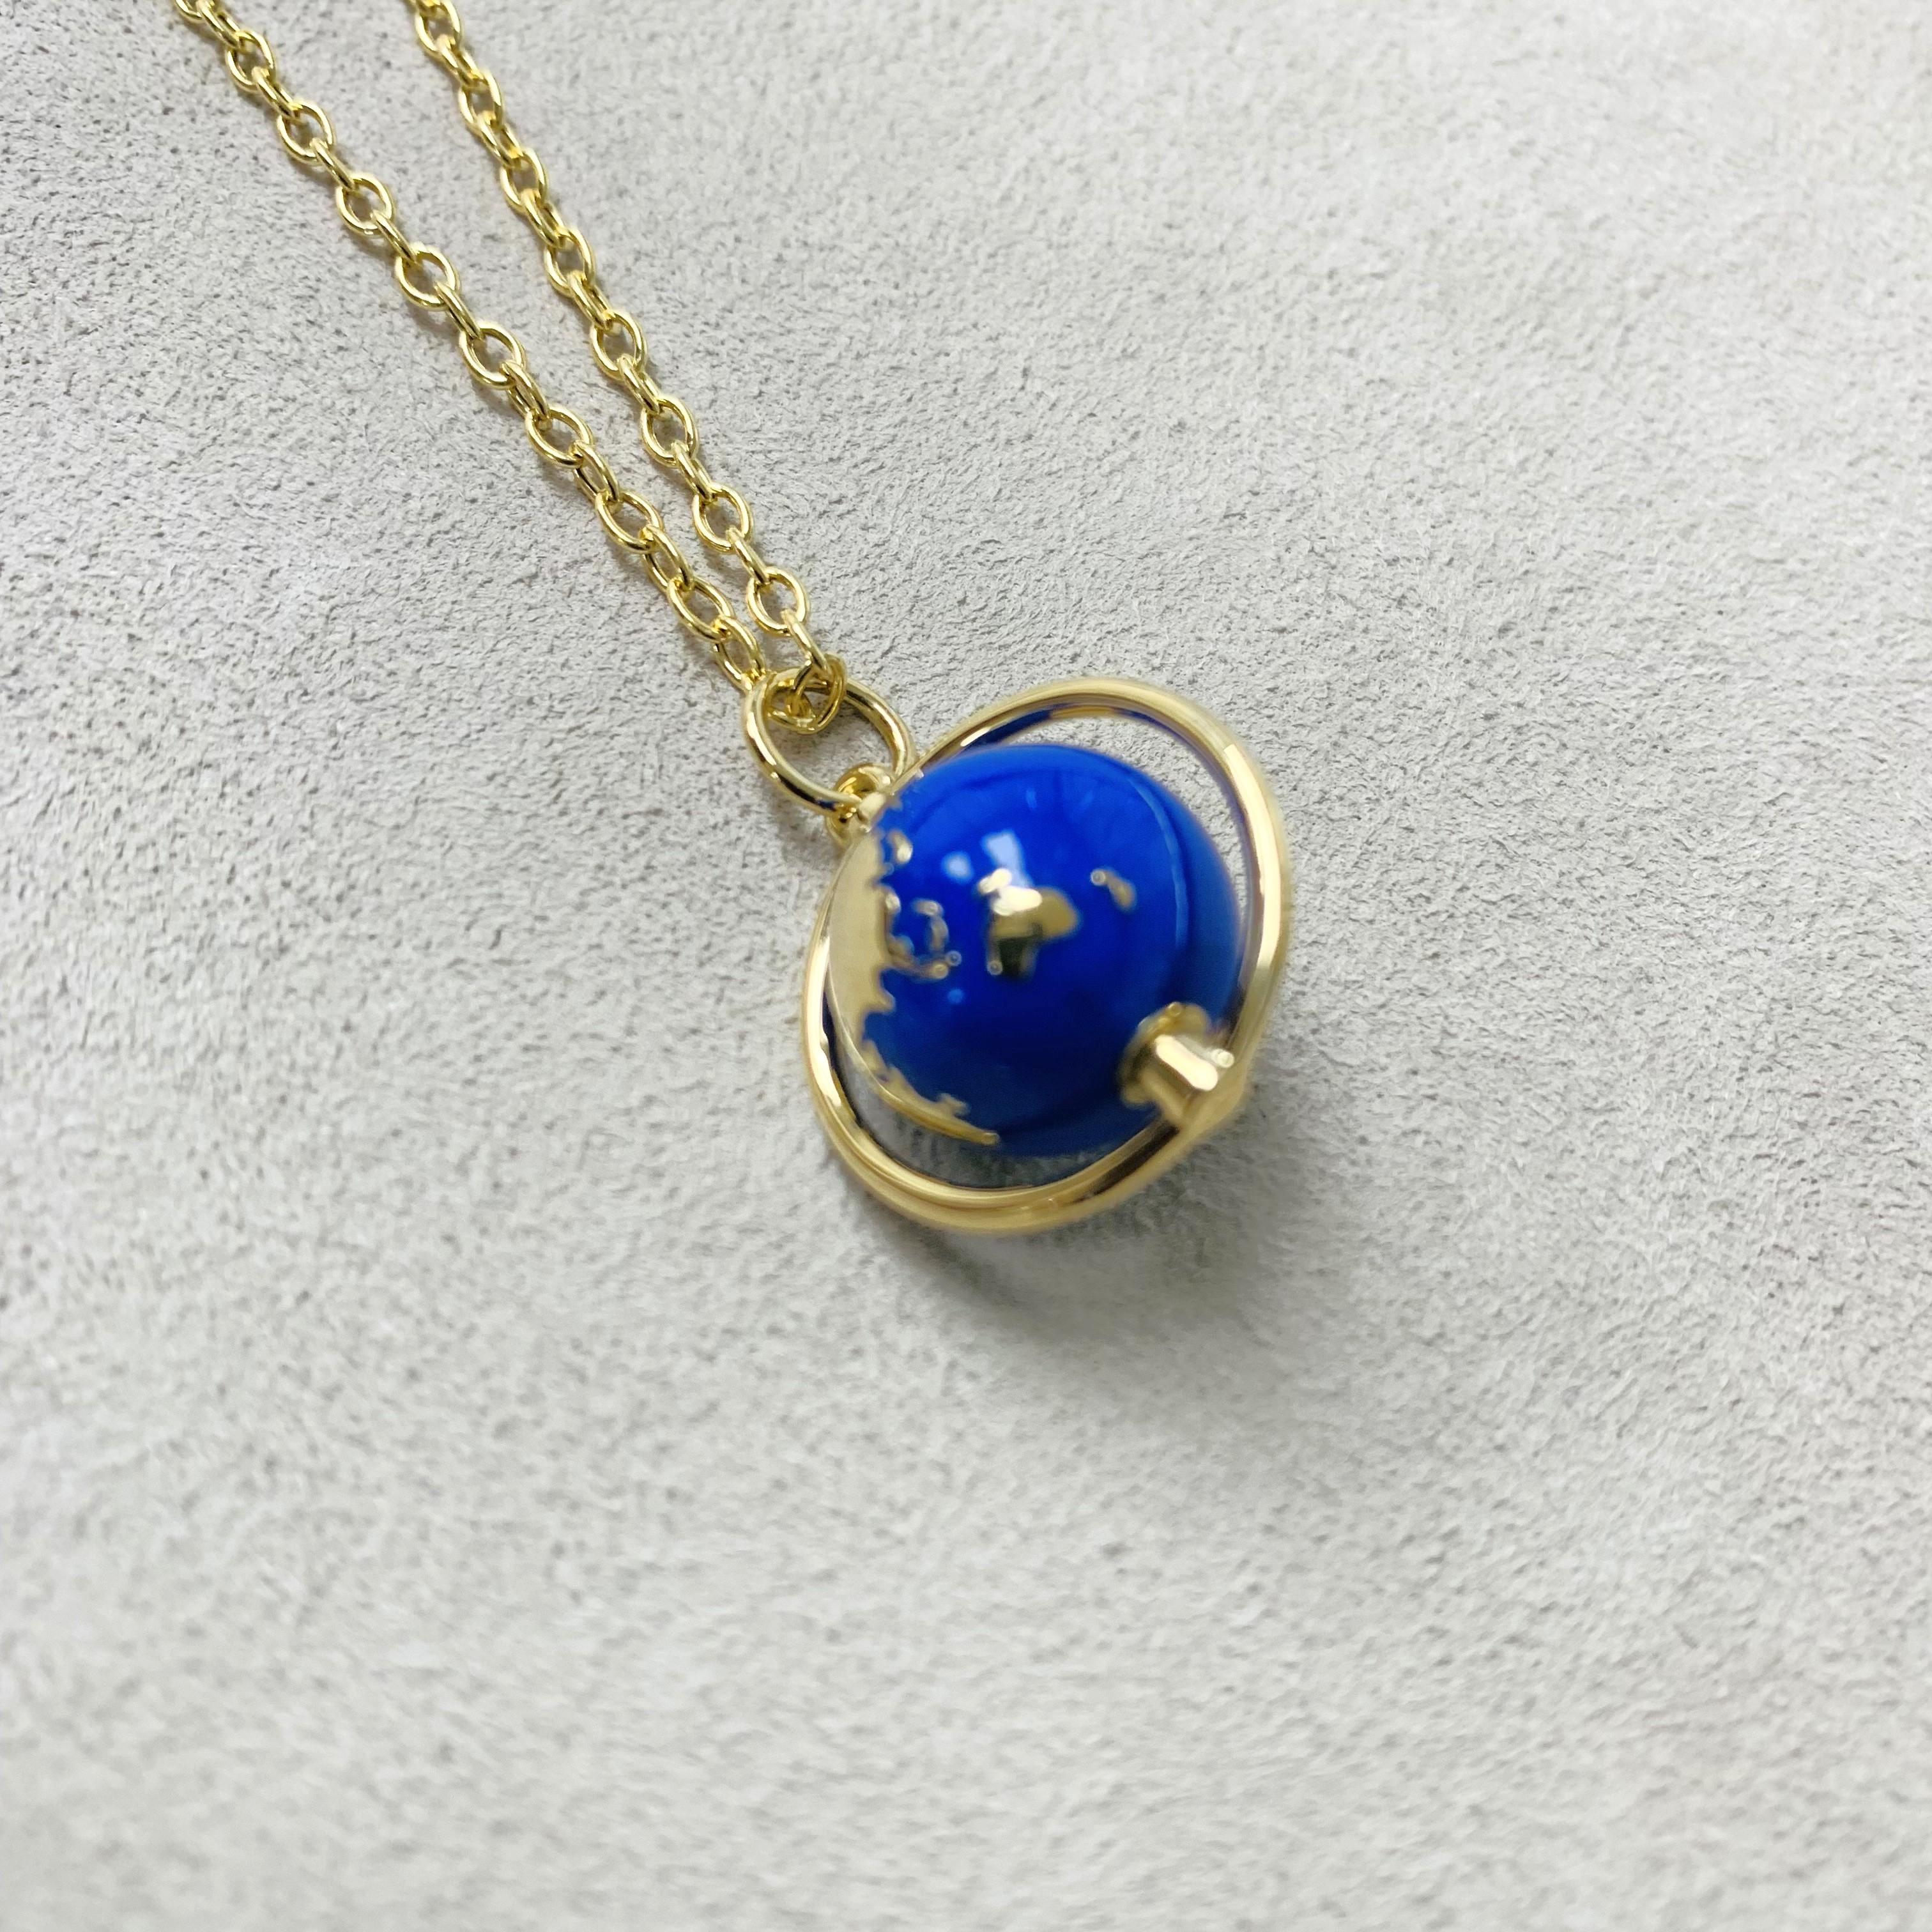 Created in 18 karat yellow gold
Lapis enamel details
Chain sold separately 
Limited edition


About the Designers ~ Dharmesh & Namrata

Drawing inspiration from little things, Dharmesh & Namrata Kothari have created an extraordinary and refreshing